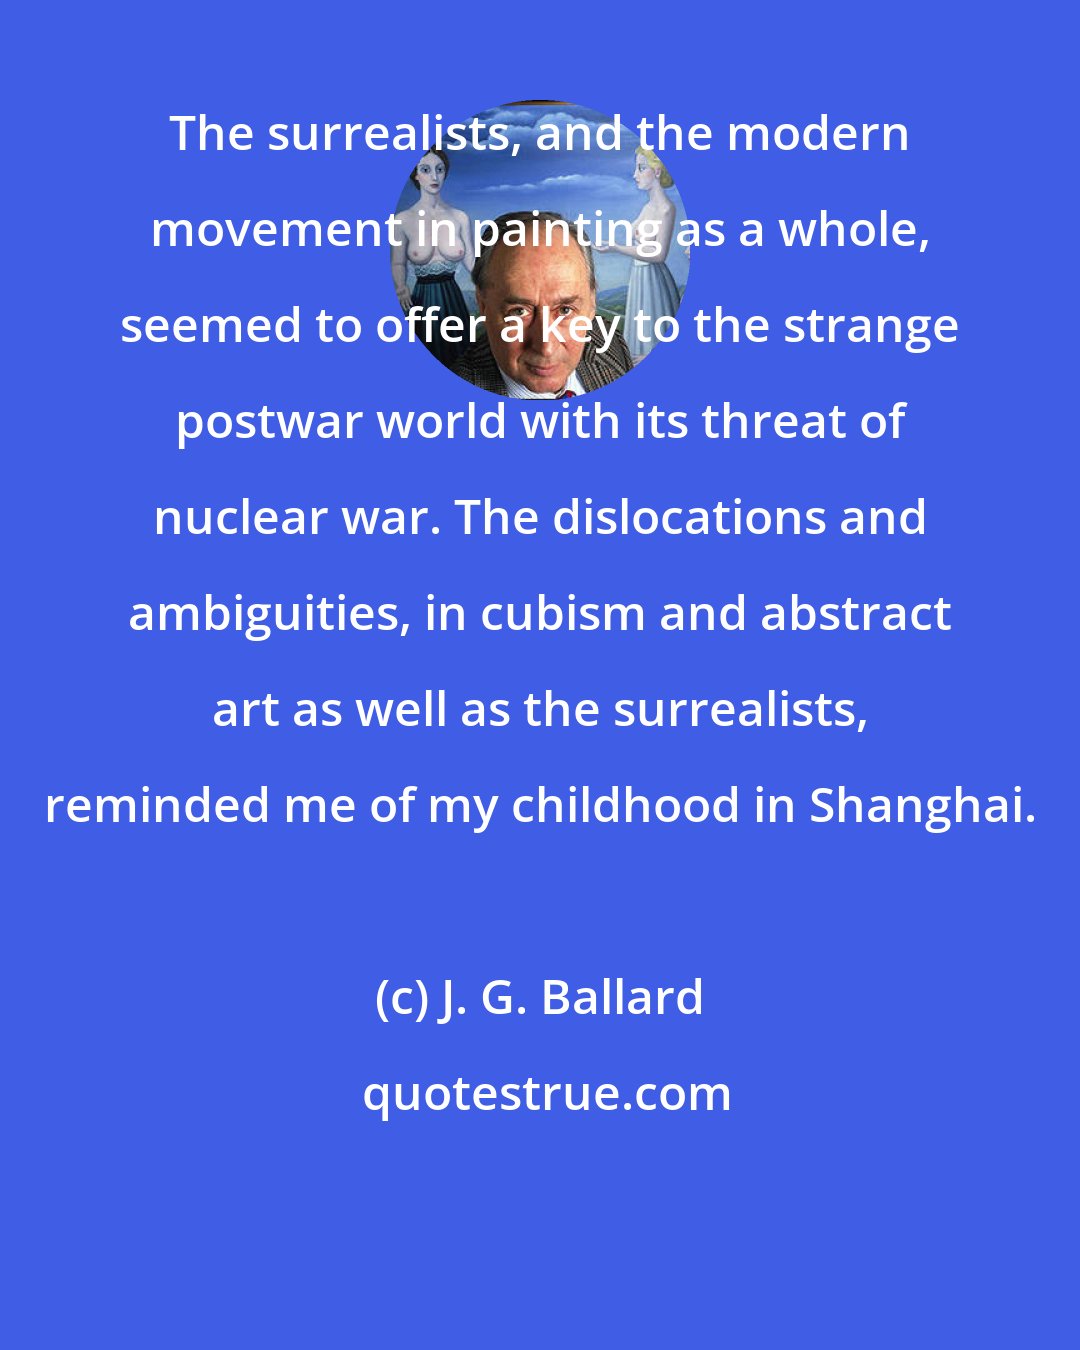 J. G. Ballard: The surrealists, and the modern movement in painting as a whole, seemed to offer a key to the strange postwar world with its threat of nuclear war. The dislocations and ambiguities, in cubism and abstract art as well as the surrealists, reminded me of my childhood in Shanghai.